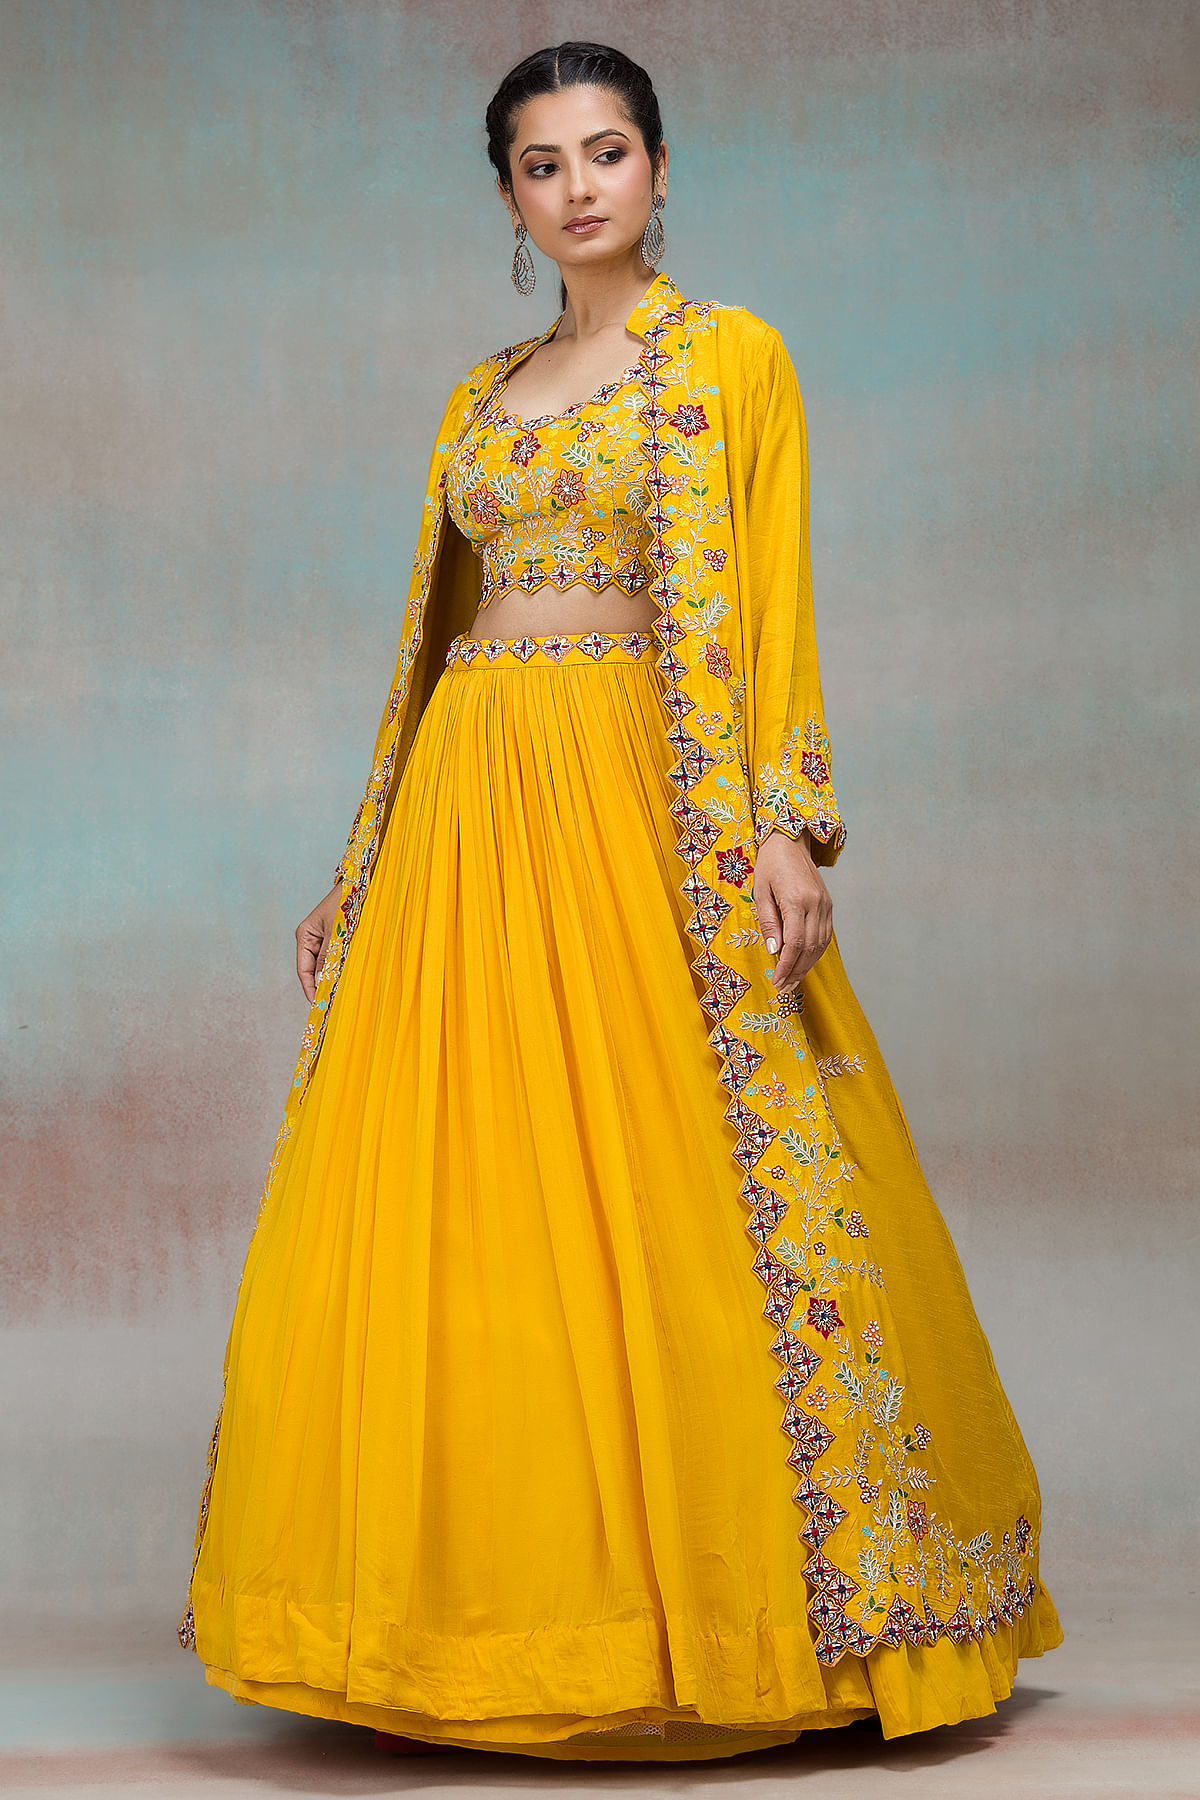 Buy Full length Tissue embroideried Jacket with Plain silk lehenga by  SHAVETA & ANUJ at Ogaan Online Shopping Site